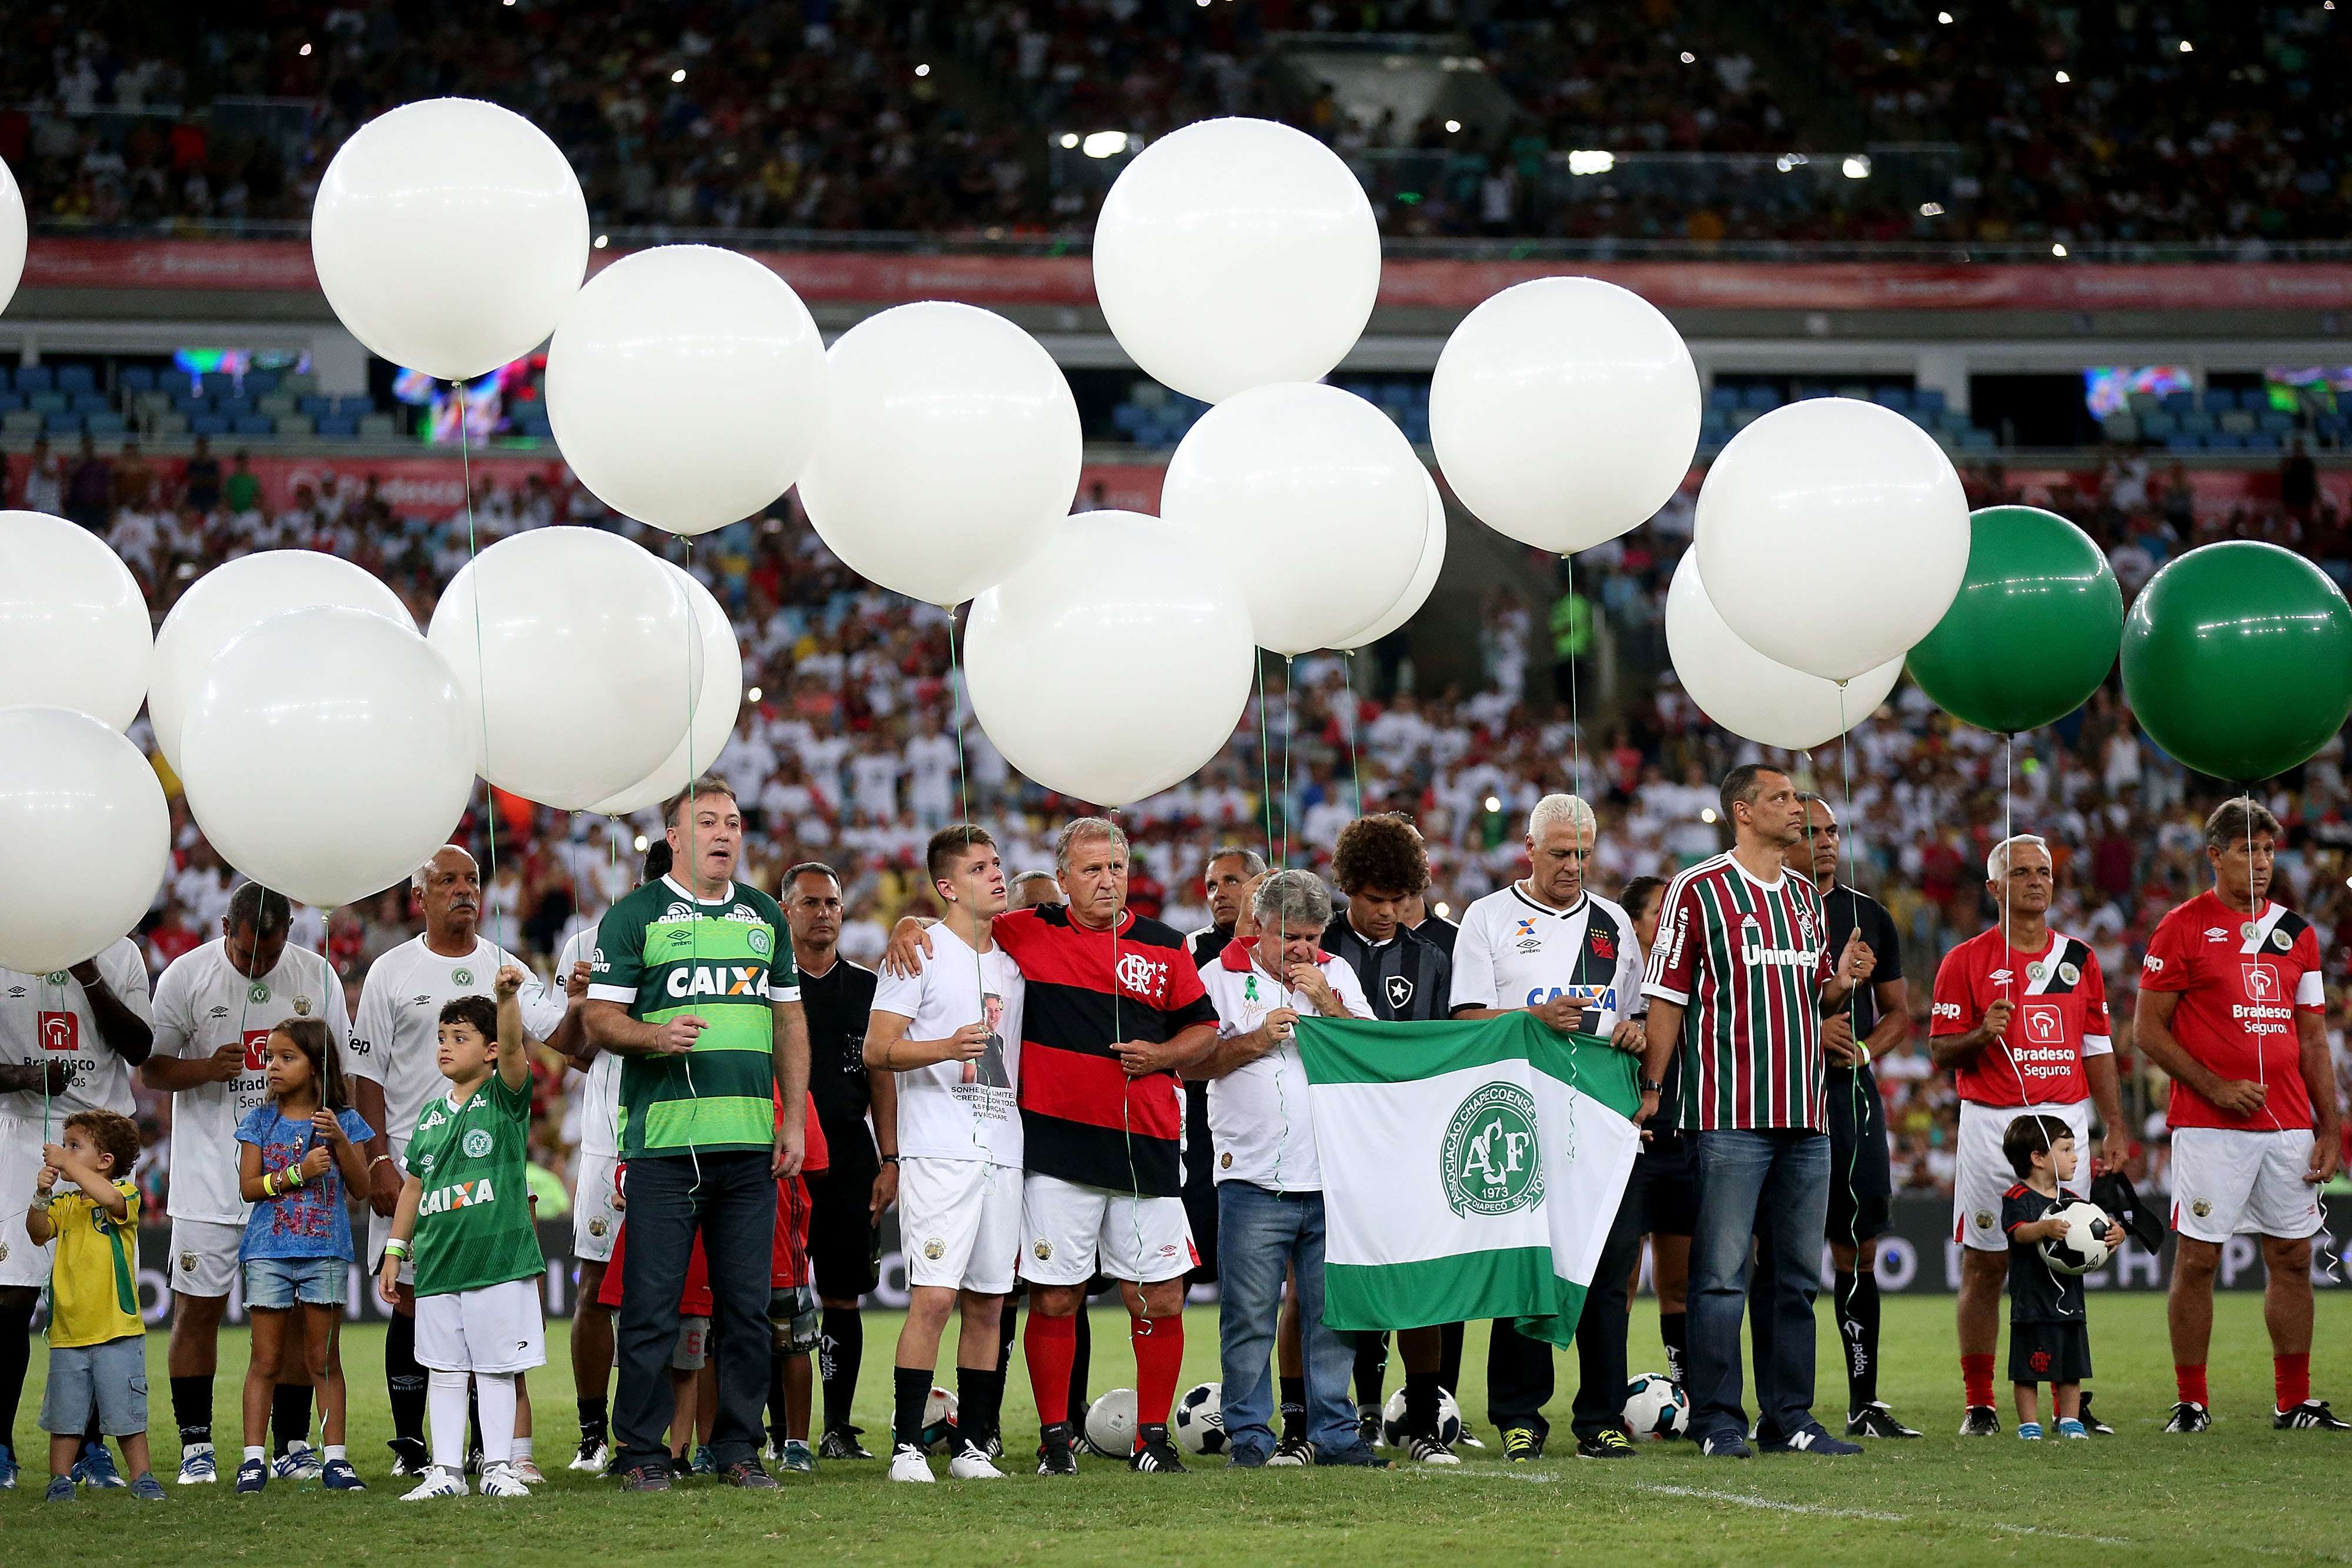 Players mourn for the victims of Chapecoense football club who died in an airplane crash before the 2016 stars charity match at the Maracana Stadium in Rio. Photo: Xinhua